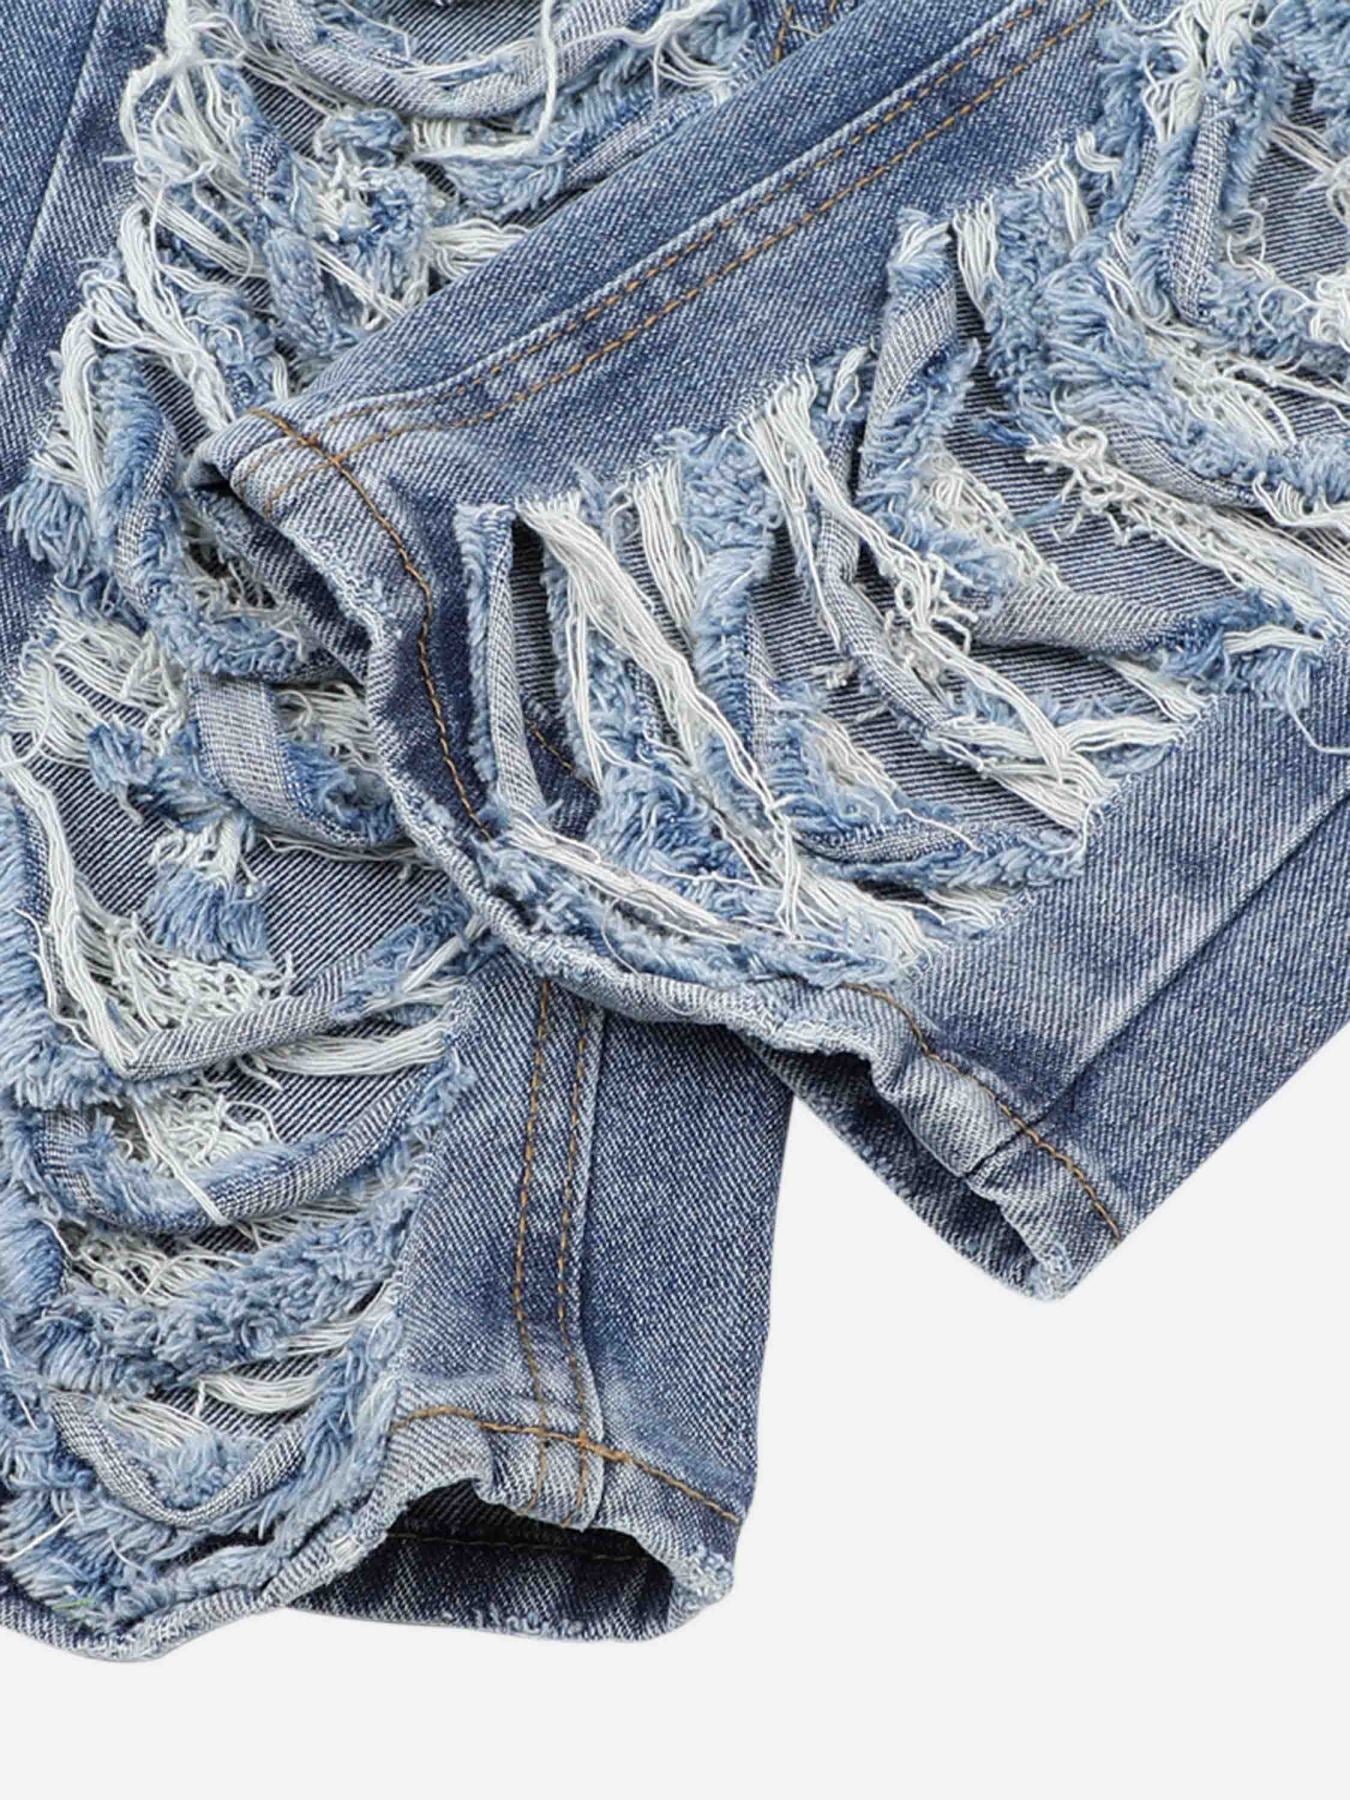 The Supermade Destroyed Cut-off Design Jeans